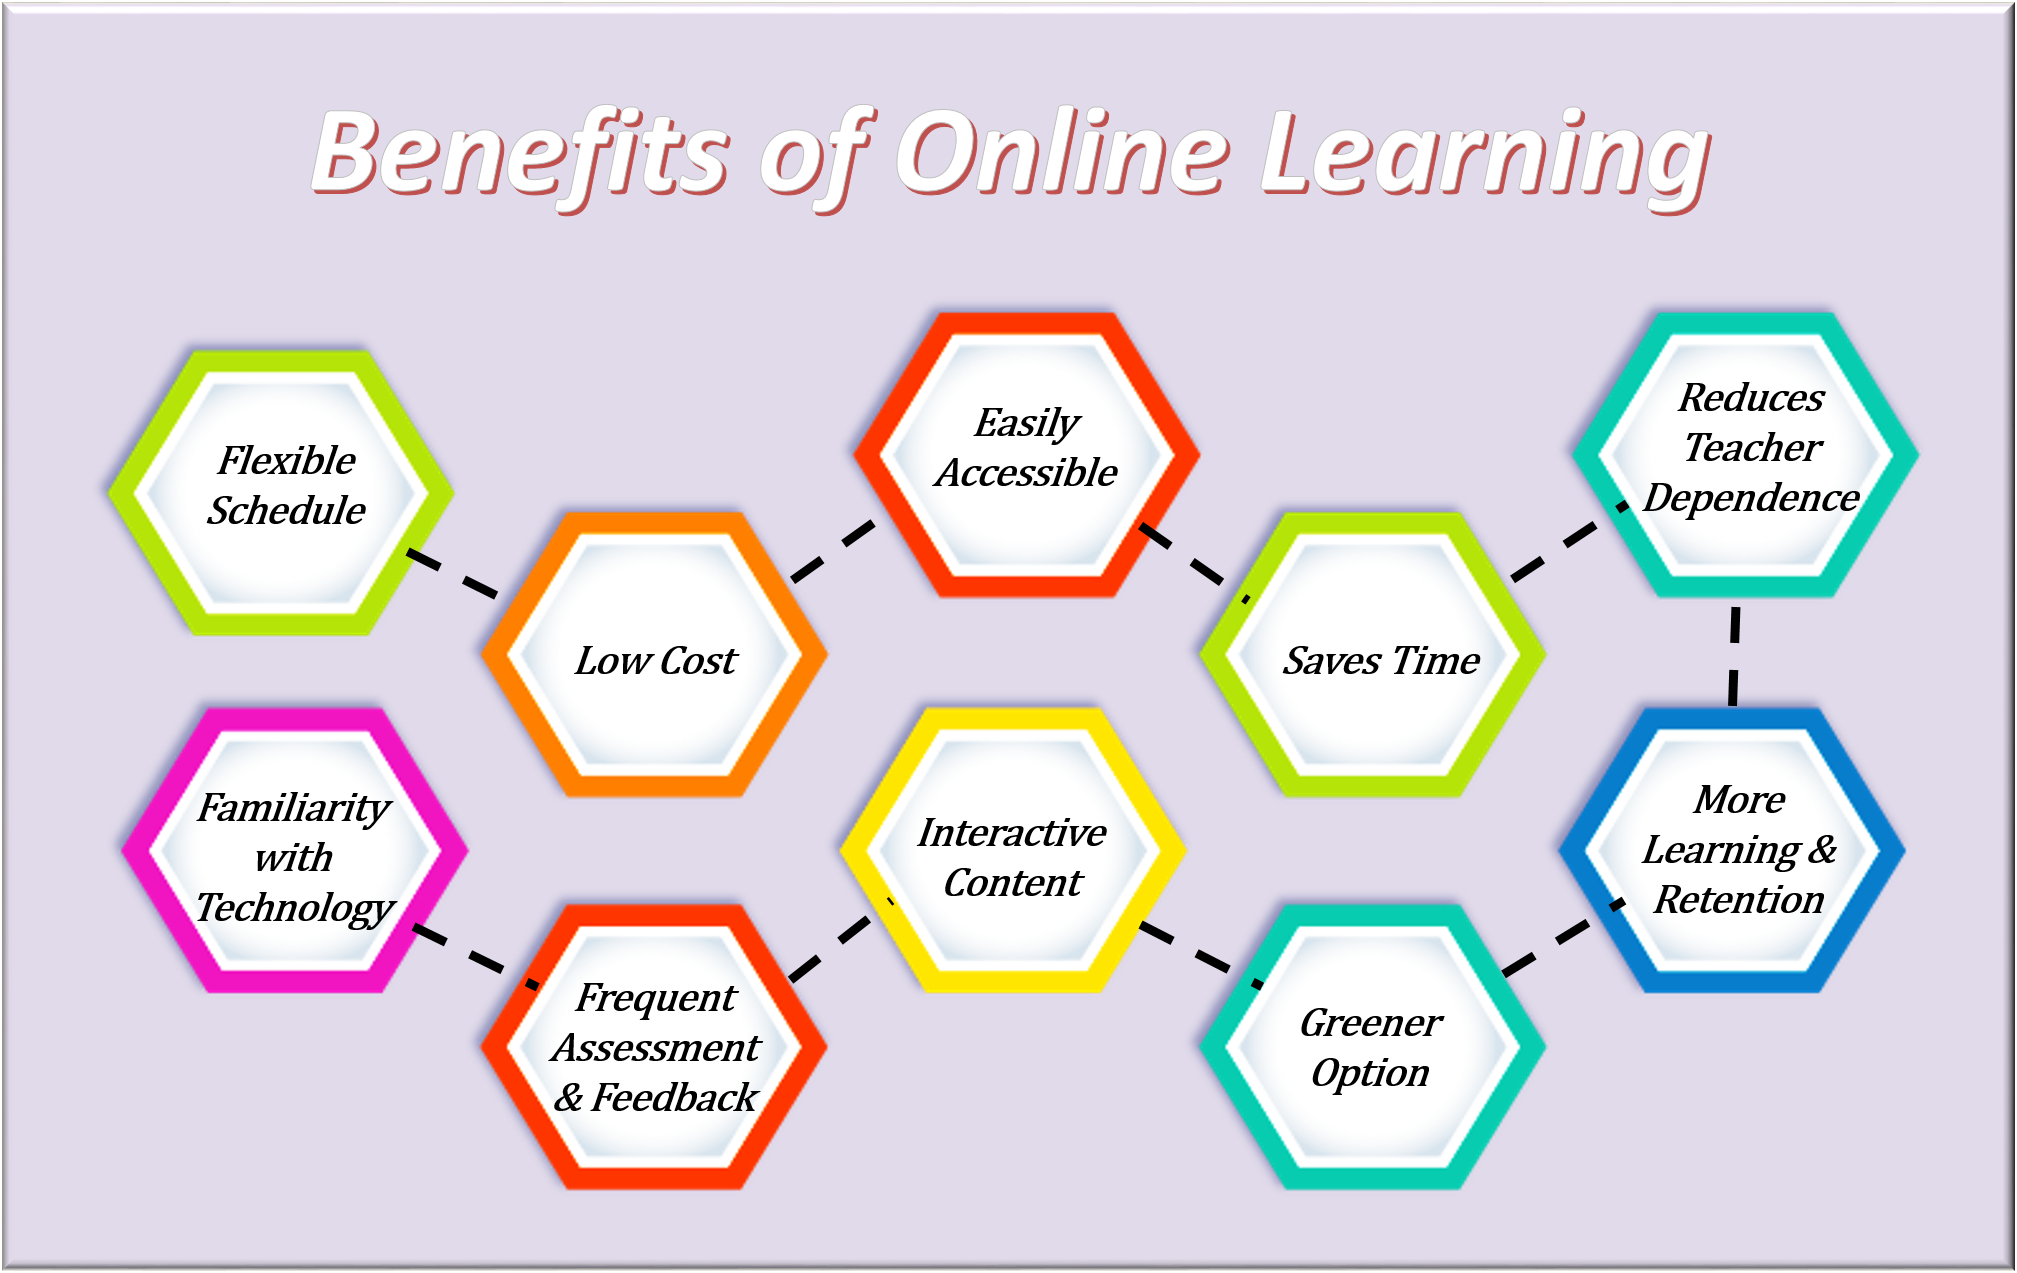 Benefits of Online Learning